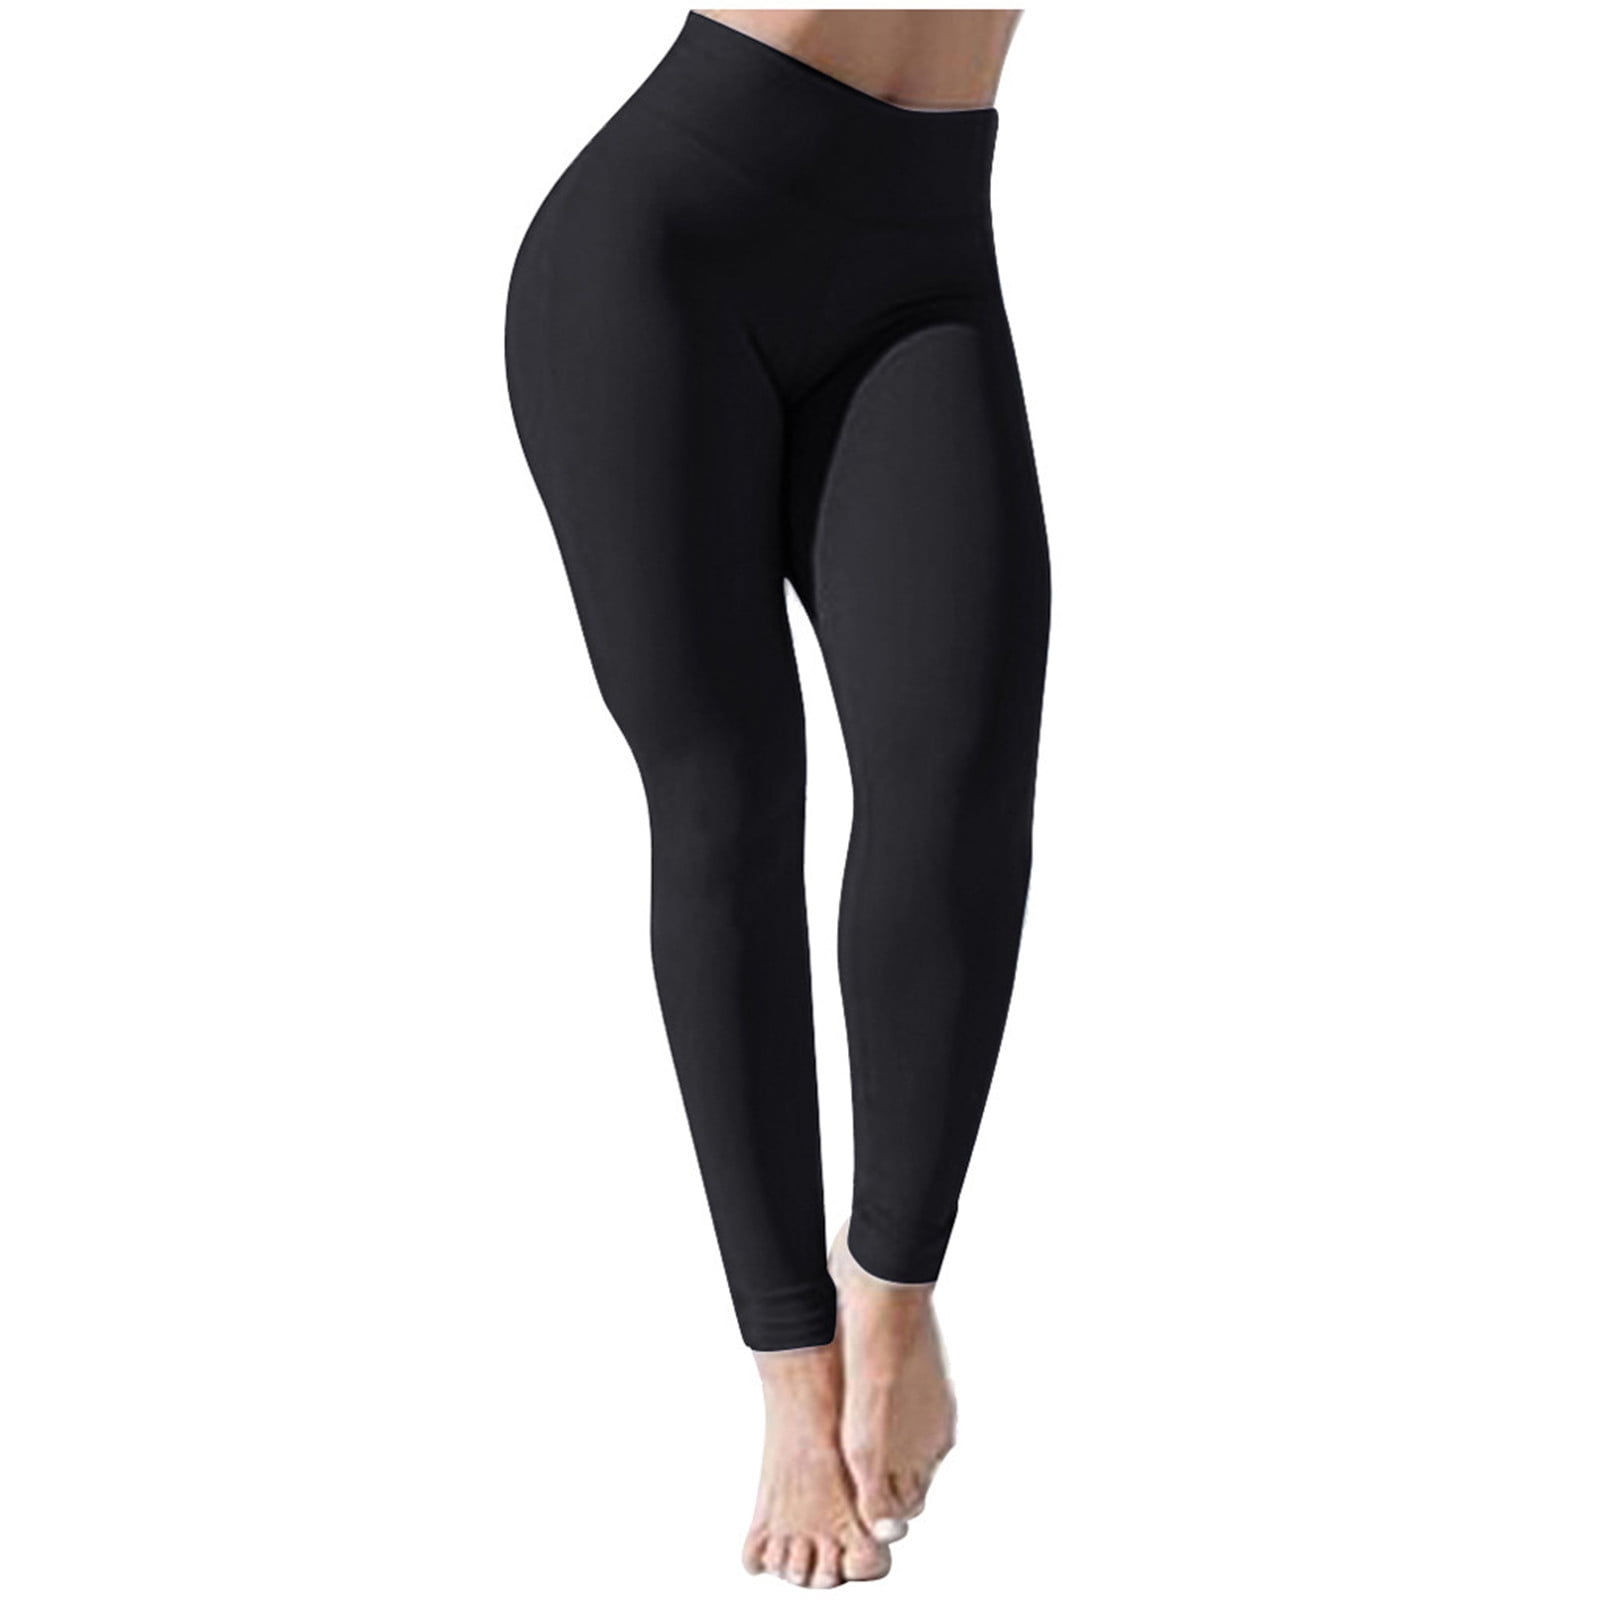 READY STOCK] Women Plus Size Stretchable High Waist Leggings Yoga Tight Fit Exercise  Gym Long Pants Size M - XL, Women's Fashion, Bottoms, Jeans & Leggings on  Carousell